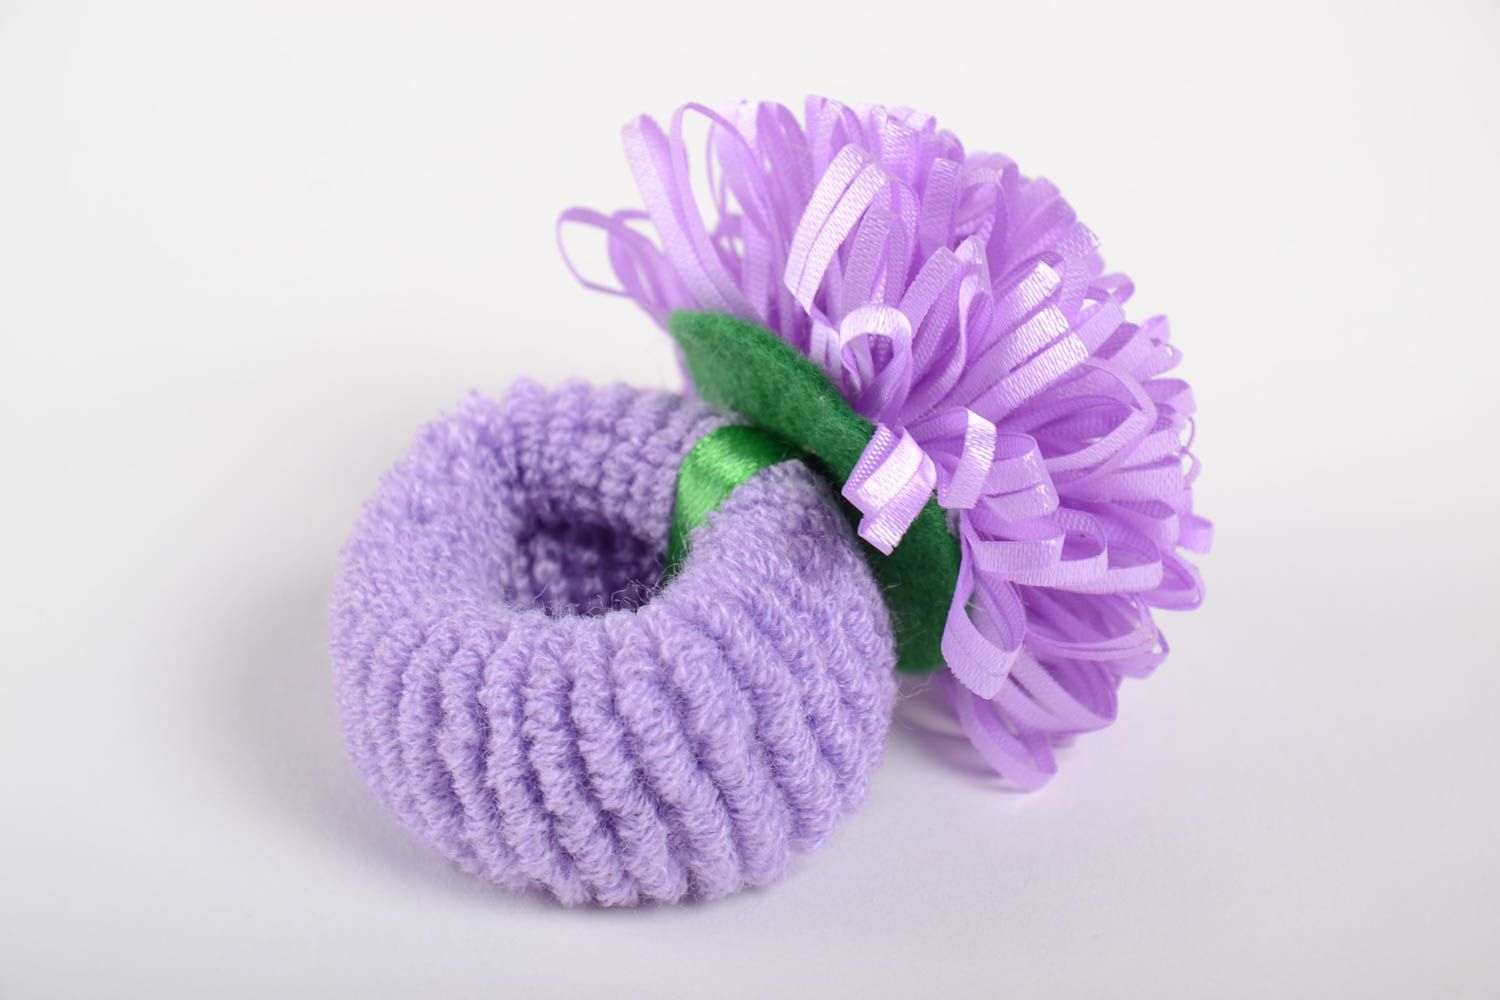 Hair tie handmade jewelry flower hair accessories ribbon hair tie gifts for her photo 3